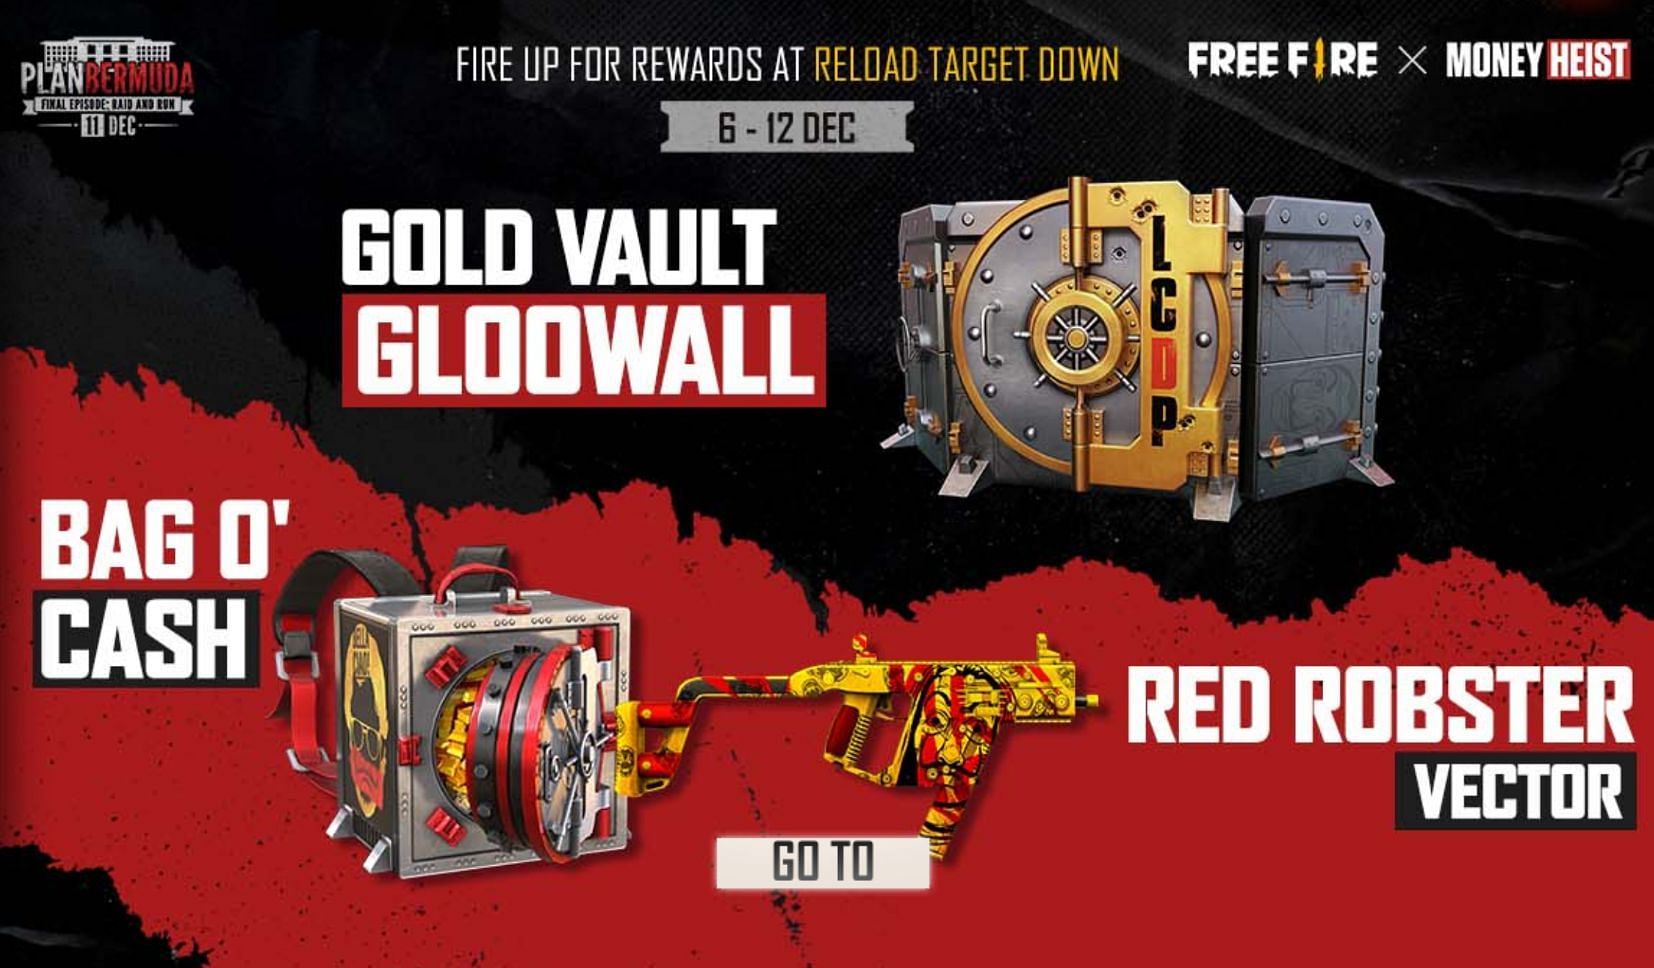 Multiple rewards are available in this event (Image via Free Fire)